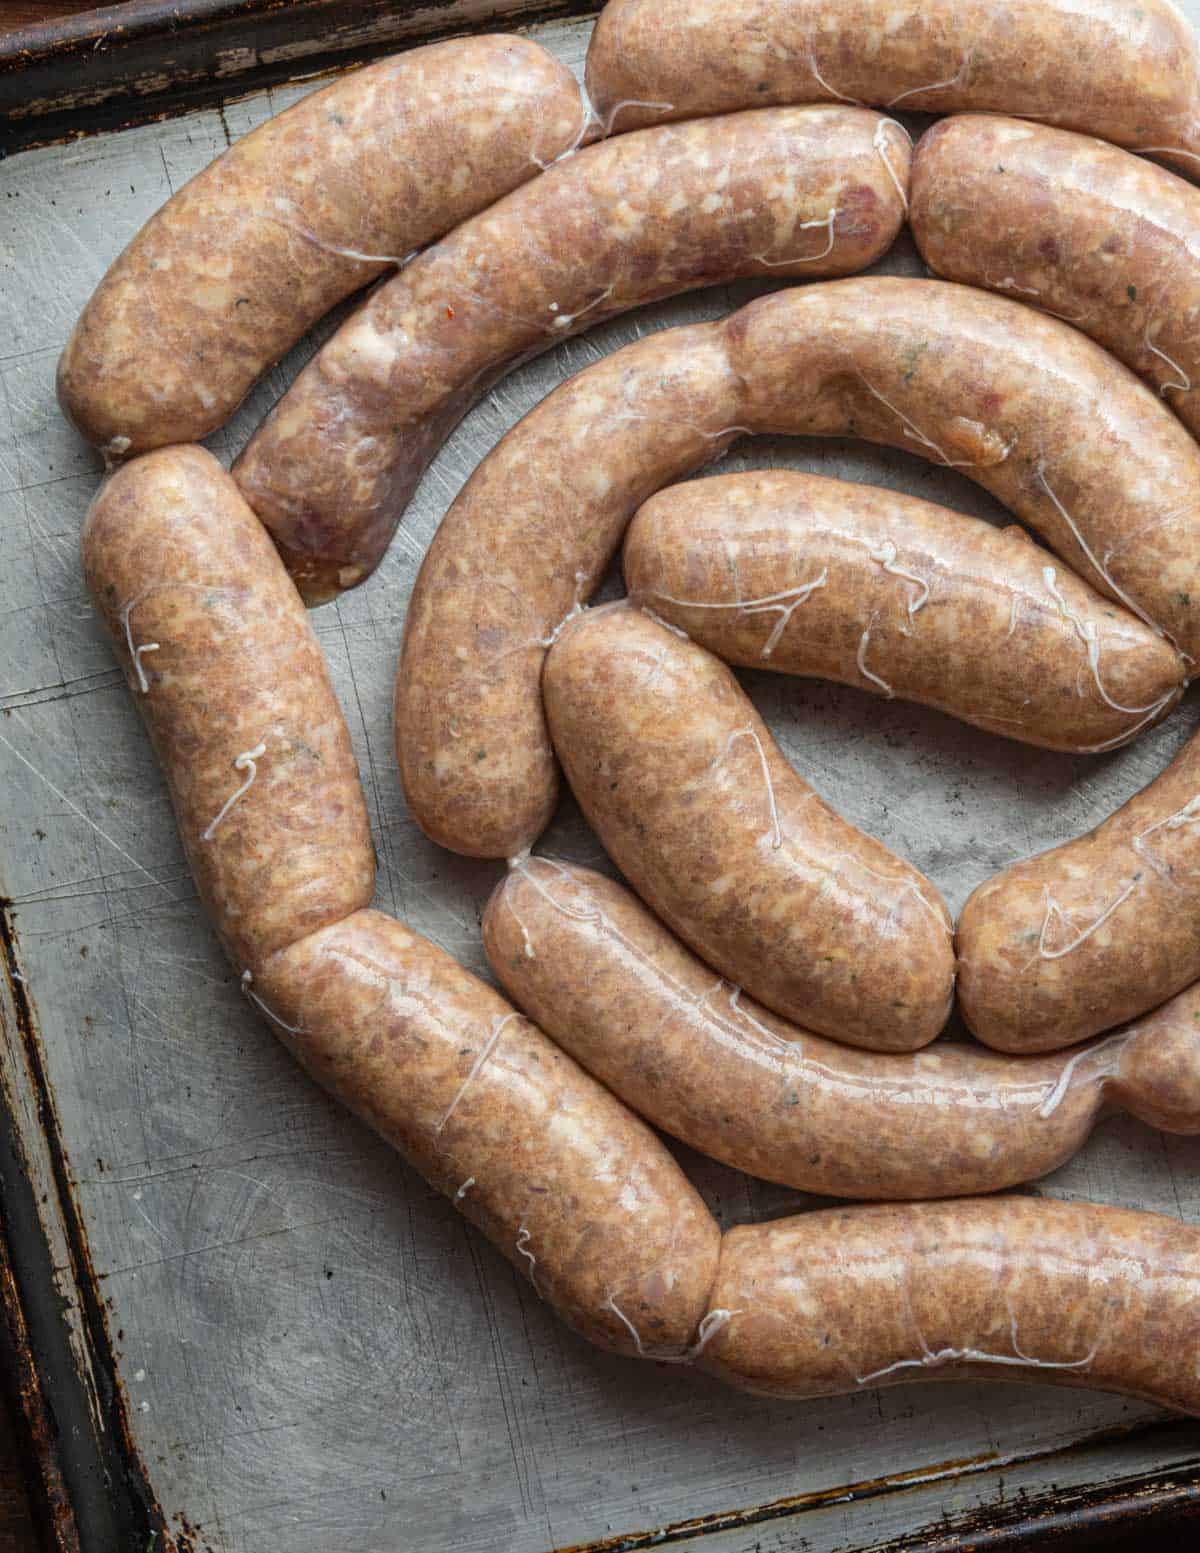 Chicken sausage being twisted into links for smoking. 